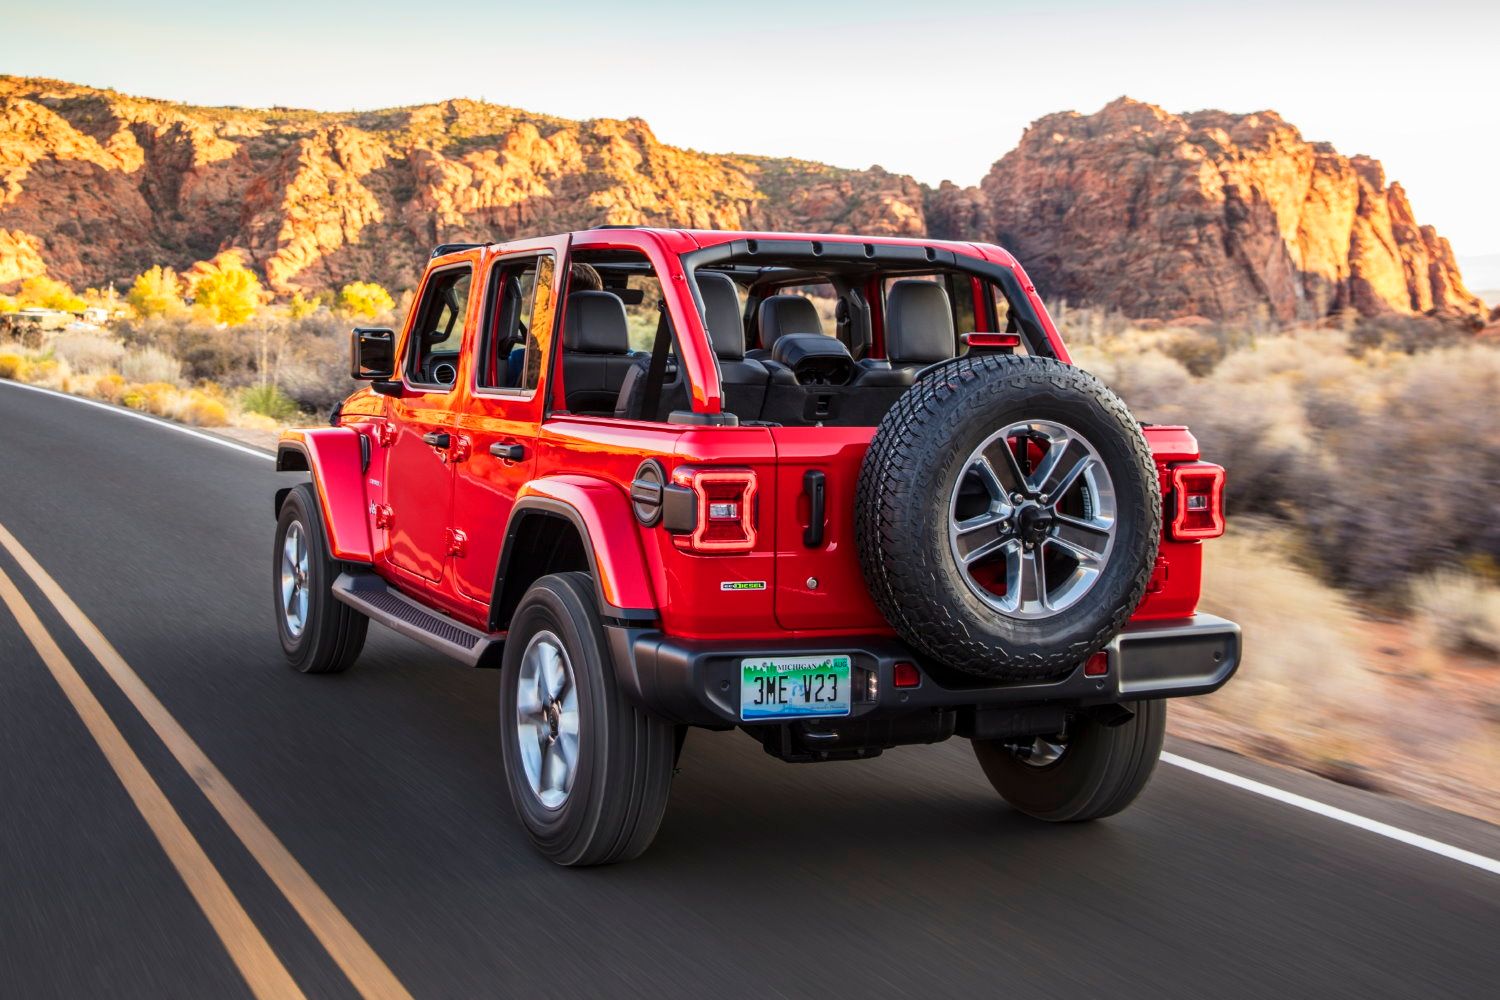 Jeep Wrangler EcoDiesel Now The Most Fuel-Efficient Wrangler Ever Made